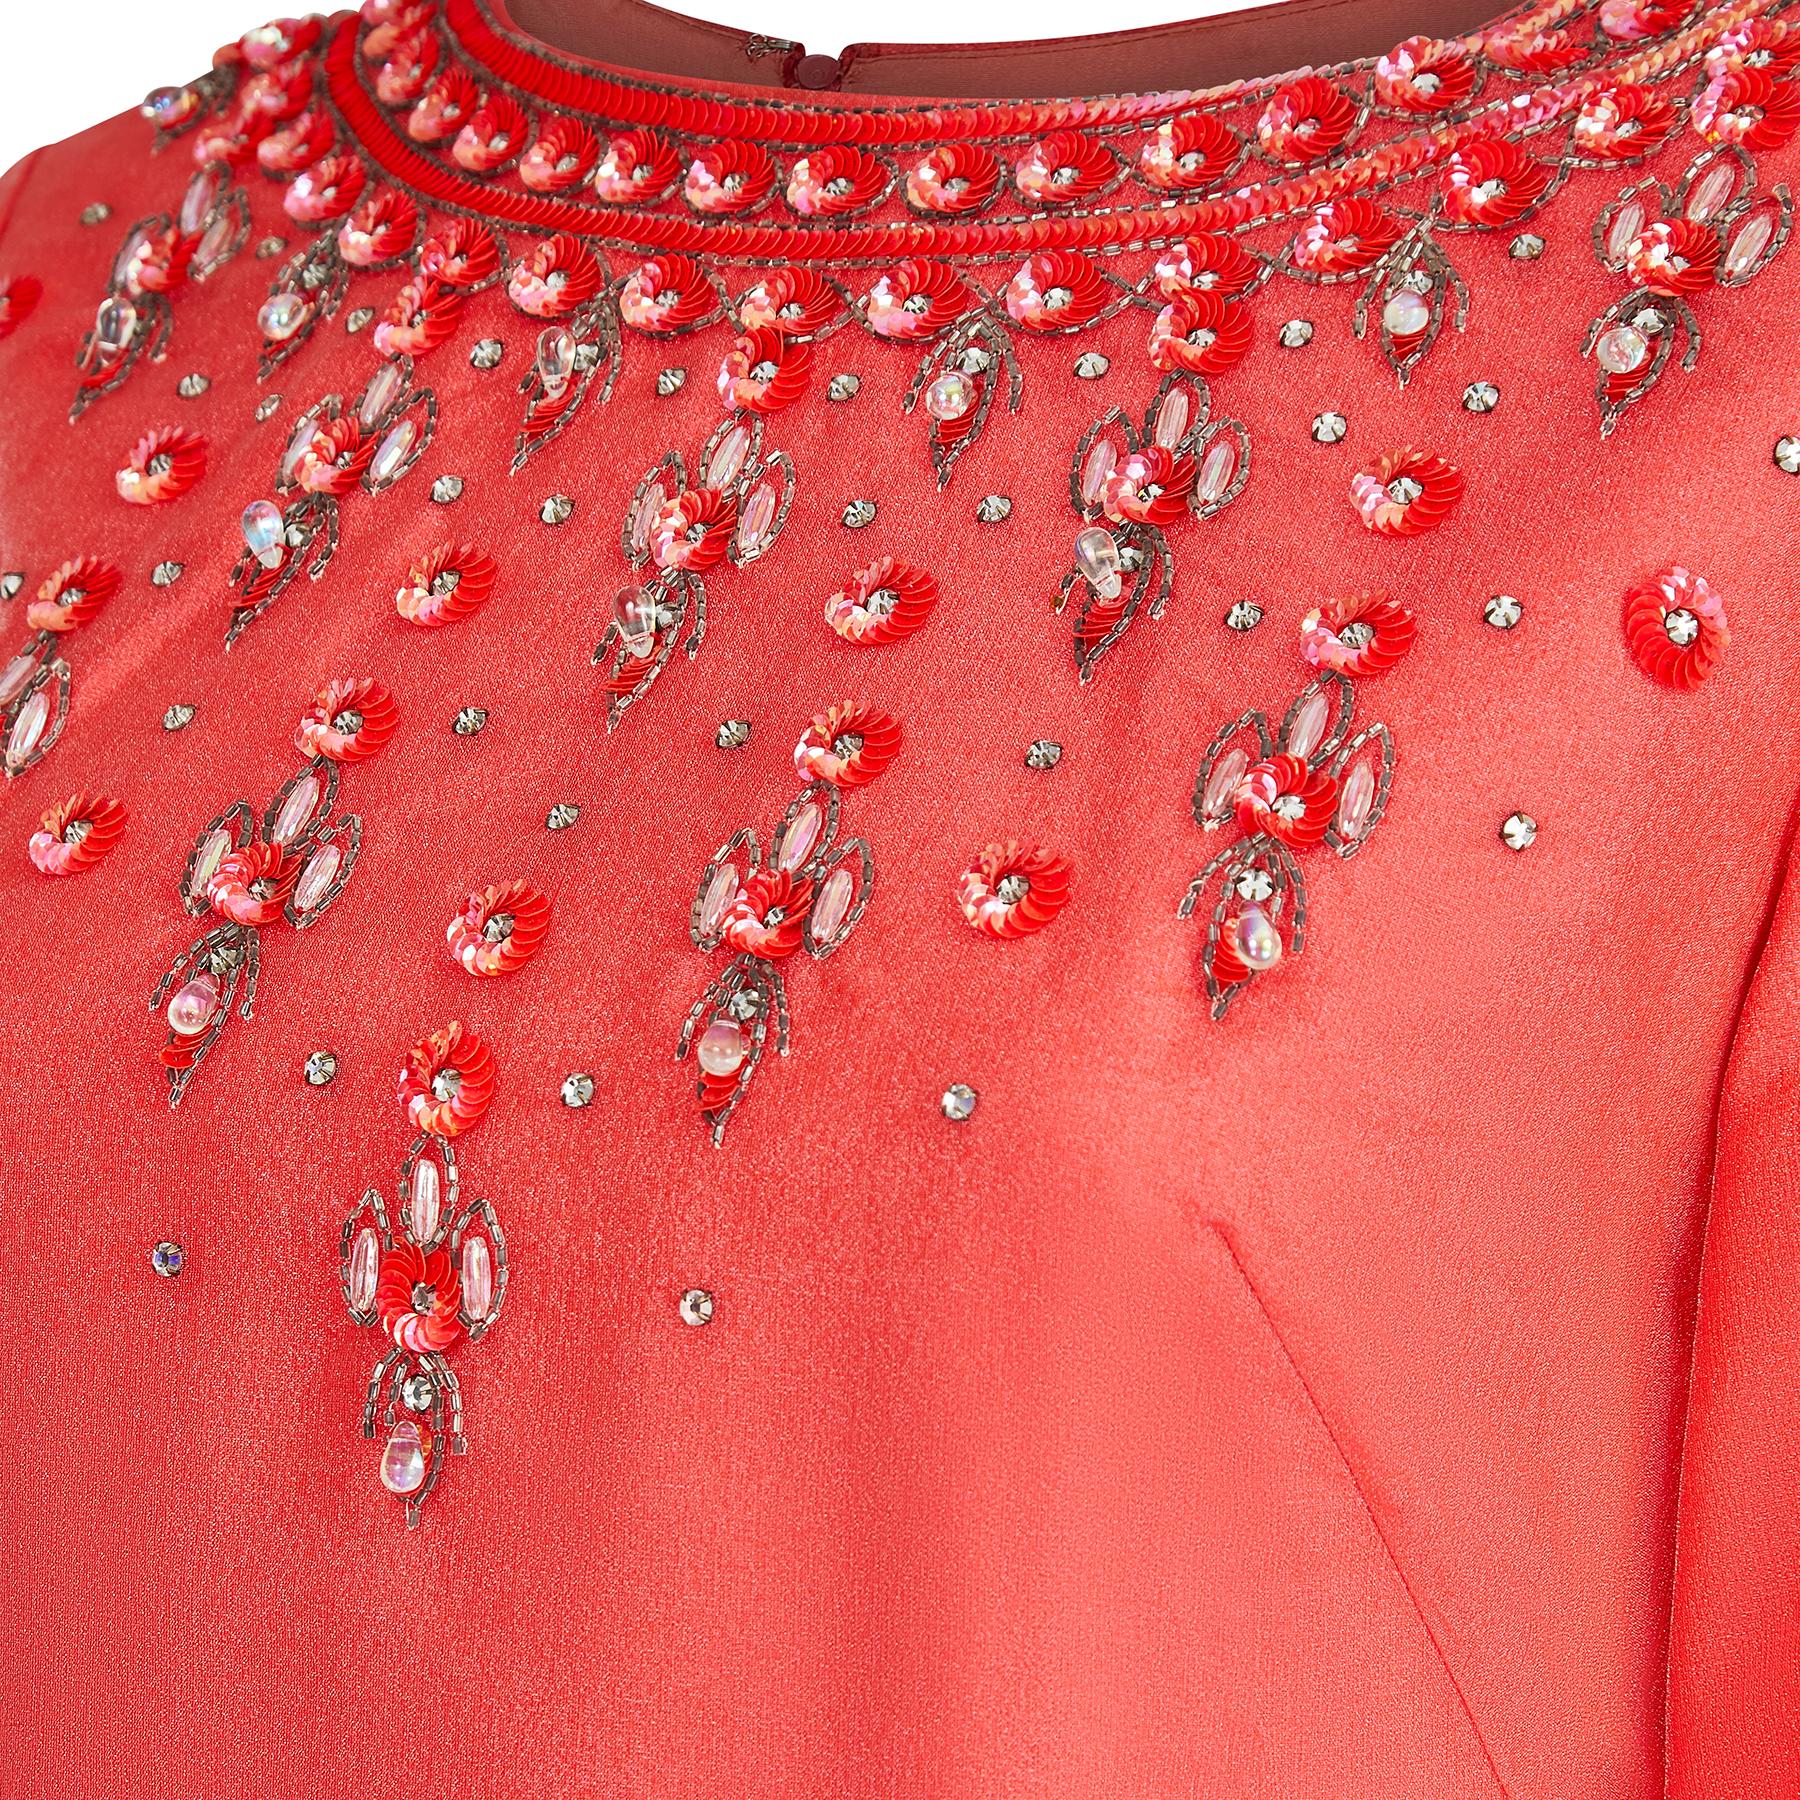 1960s Bramel Model Beaded Coral Red Dress In Excellent Condition For Sale In London, GB